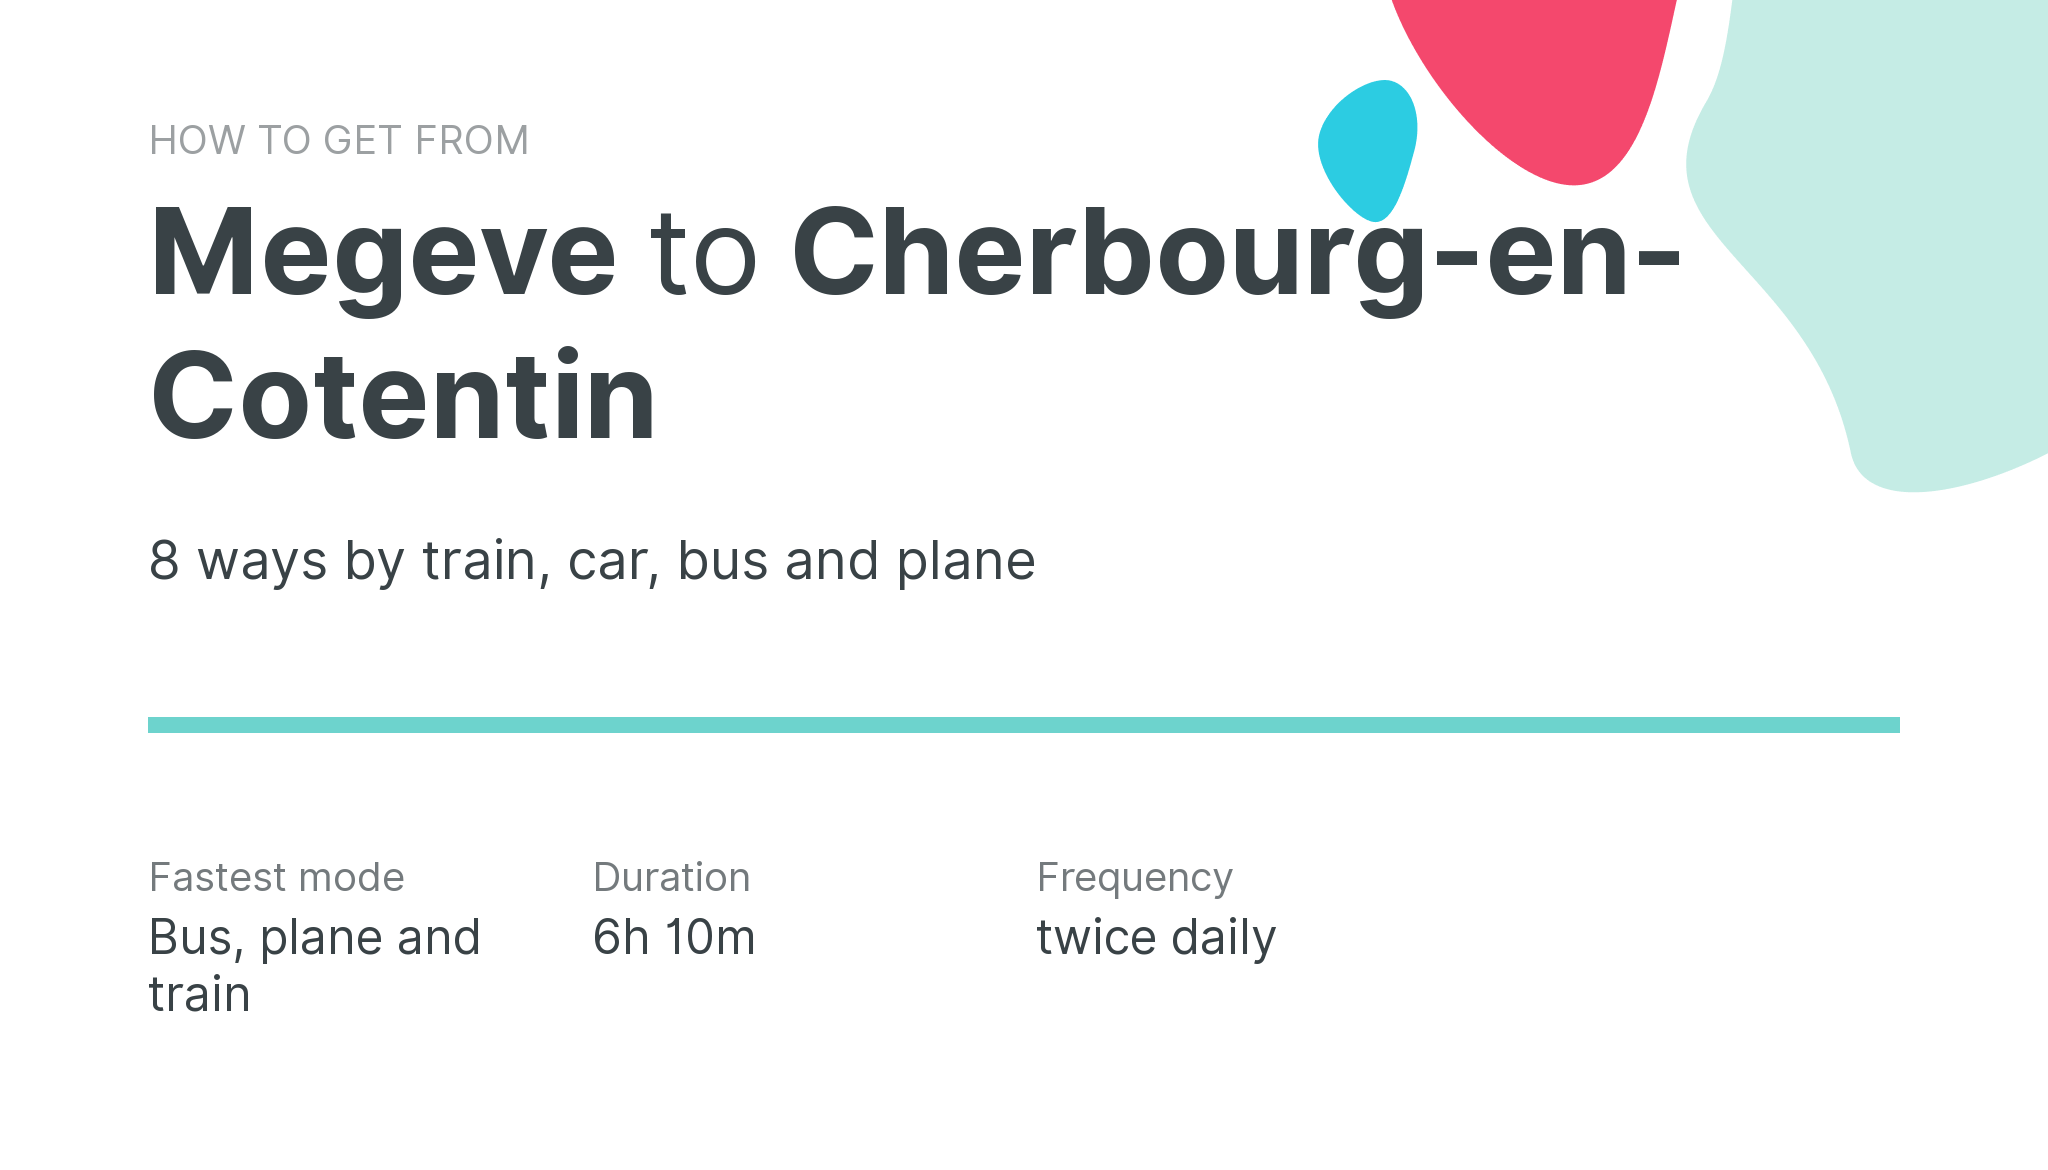 How do I get from Megeve to Cherbourg-en-Cotentin